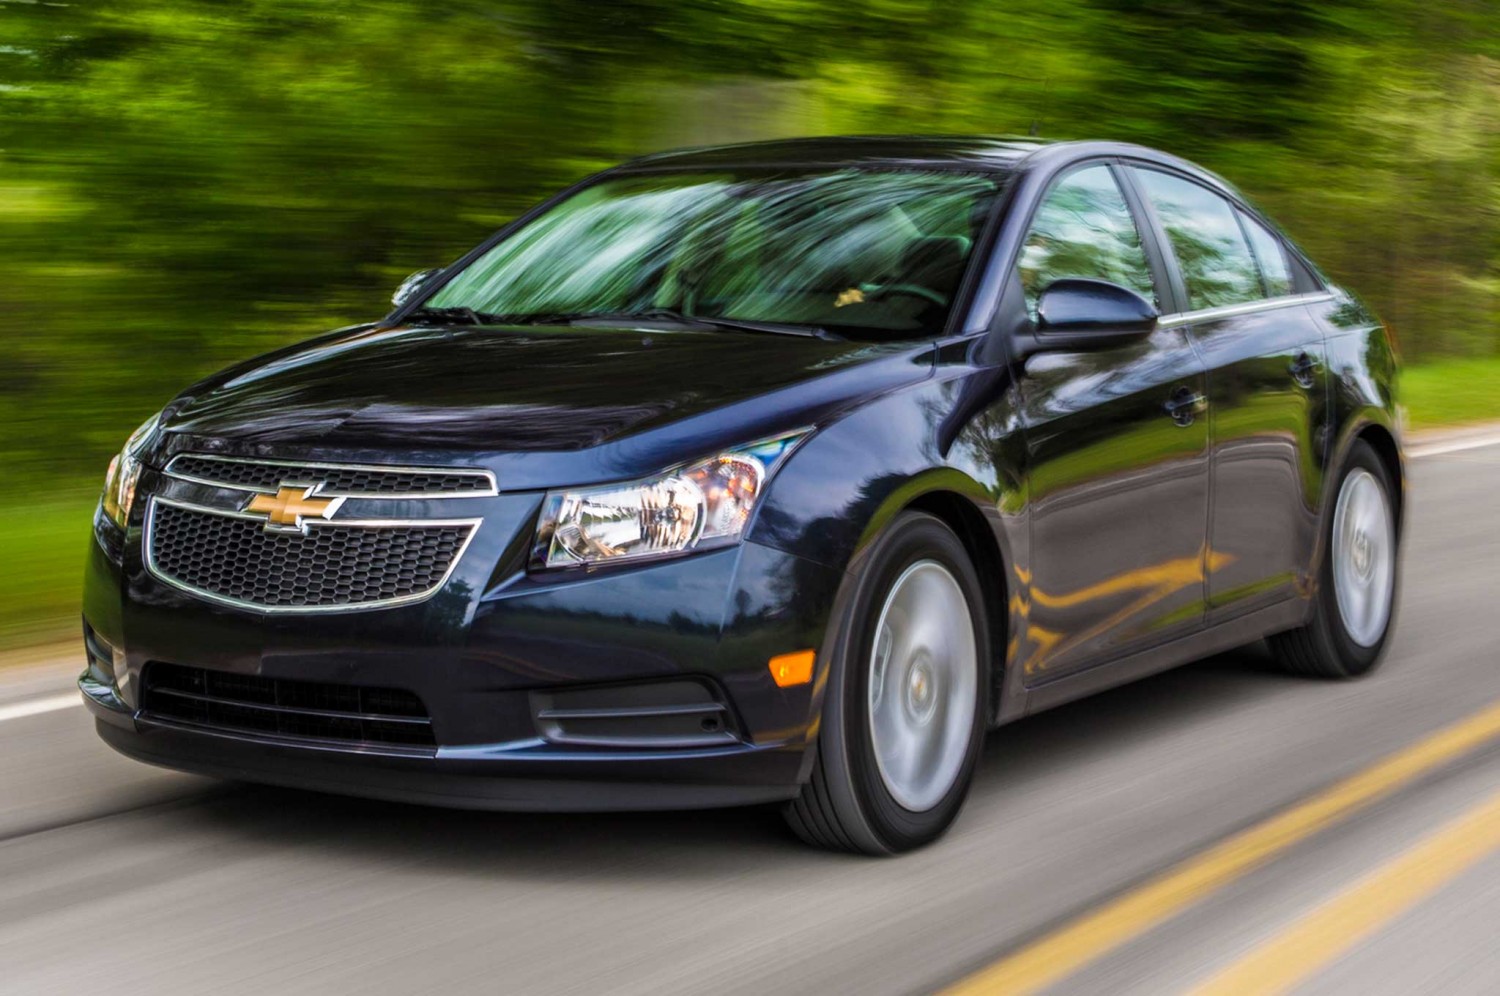 2014 Chevy Cruze Turbo Diesel Everything you ever wanted